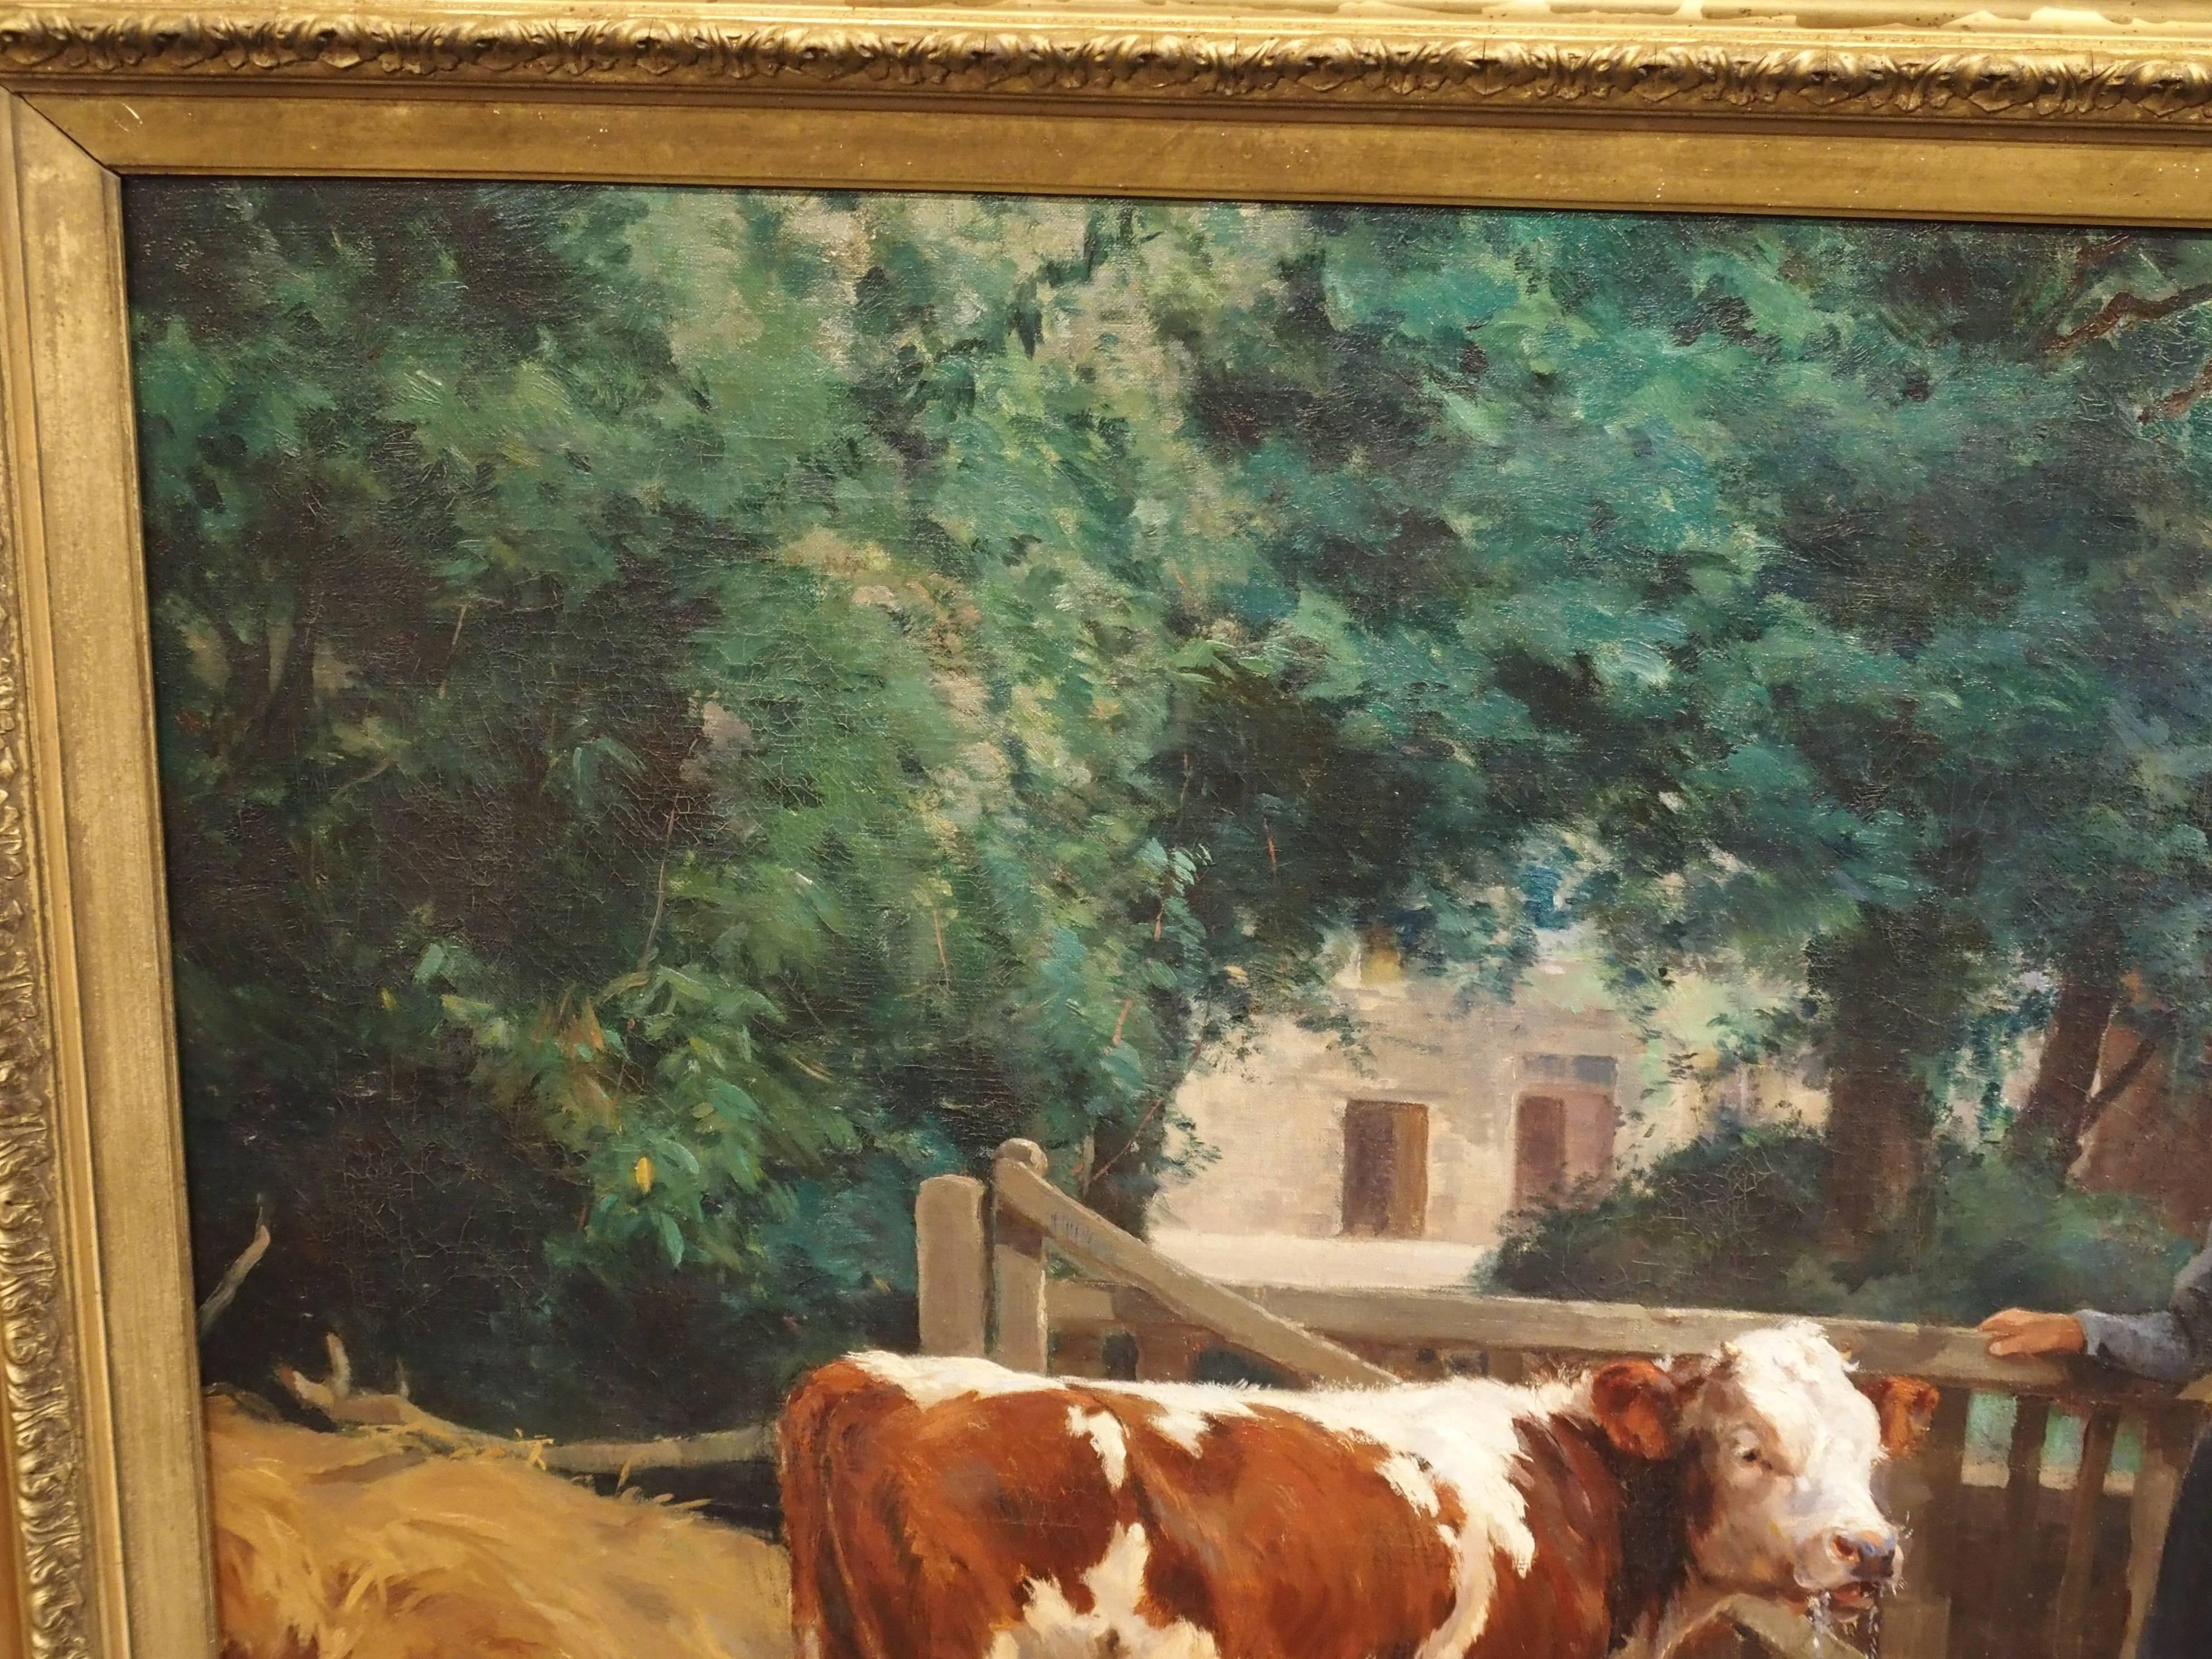 Large Antique French Oil on Canvas, a Farm Scene by Le Vavasseuer 1